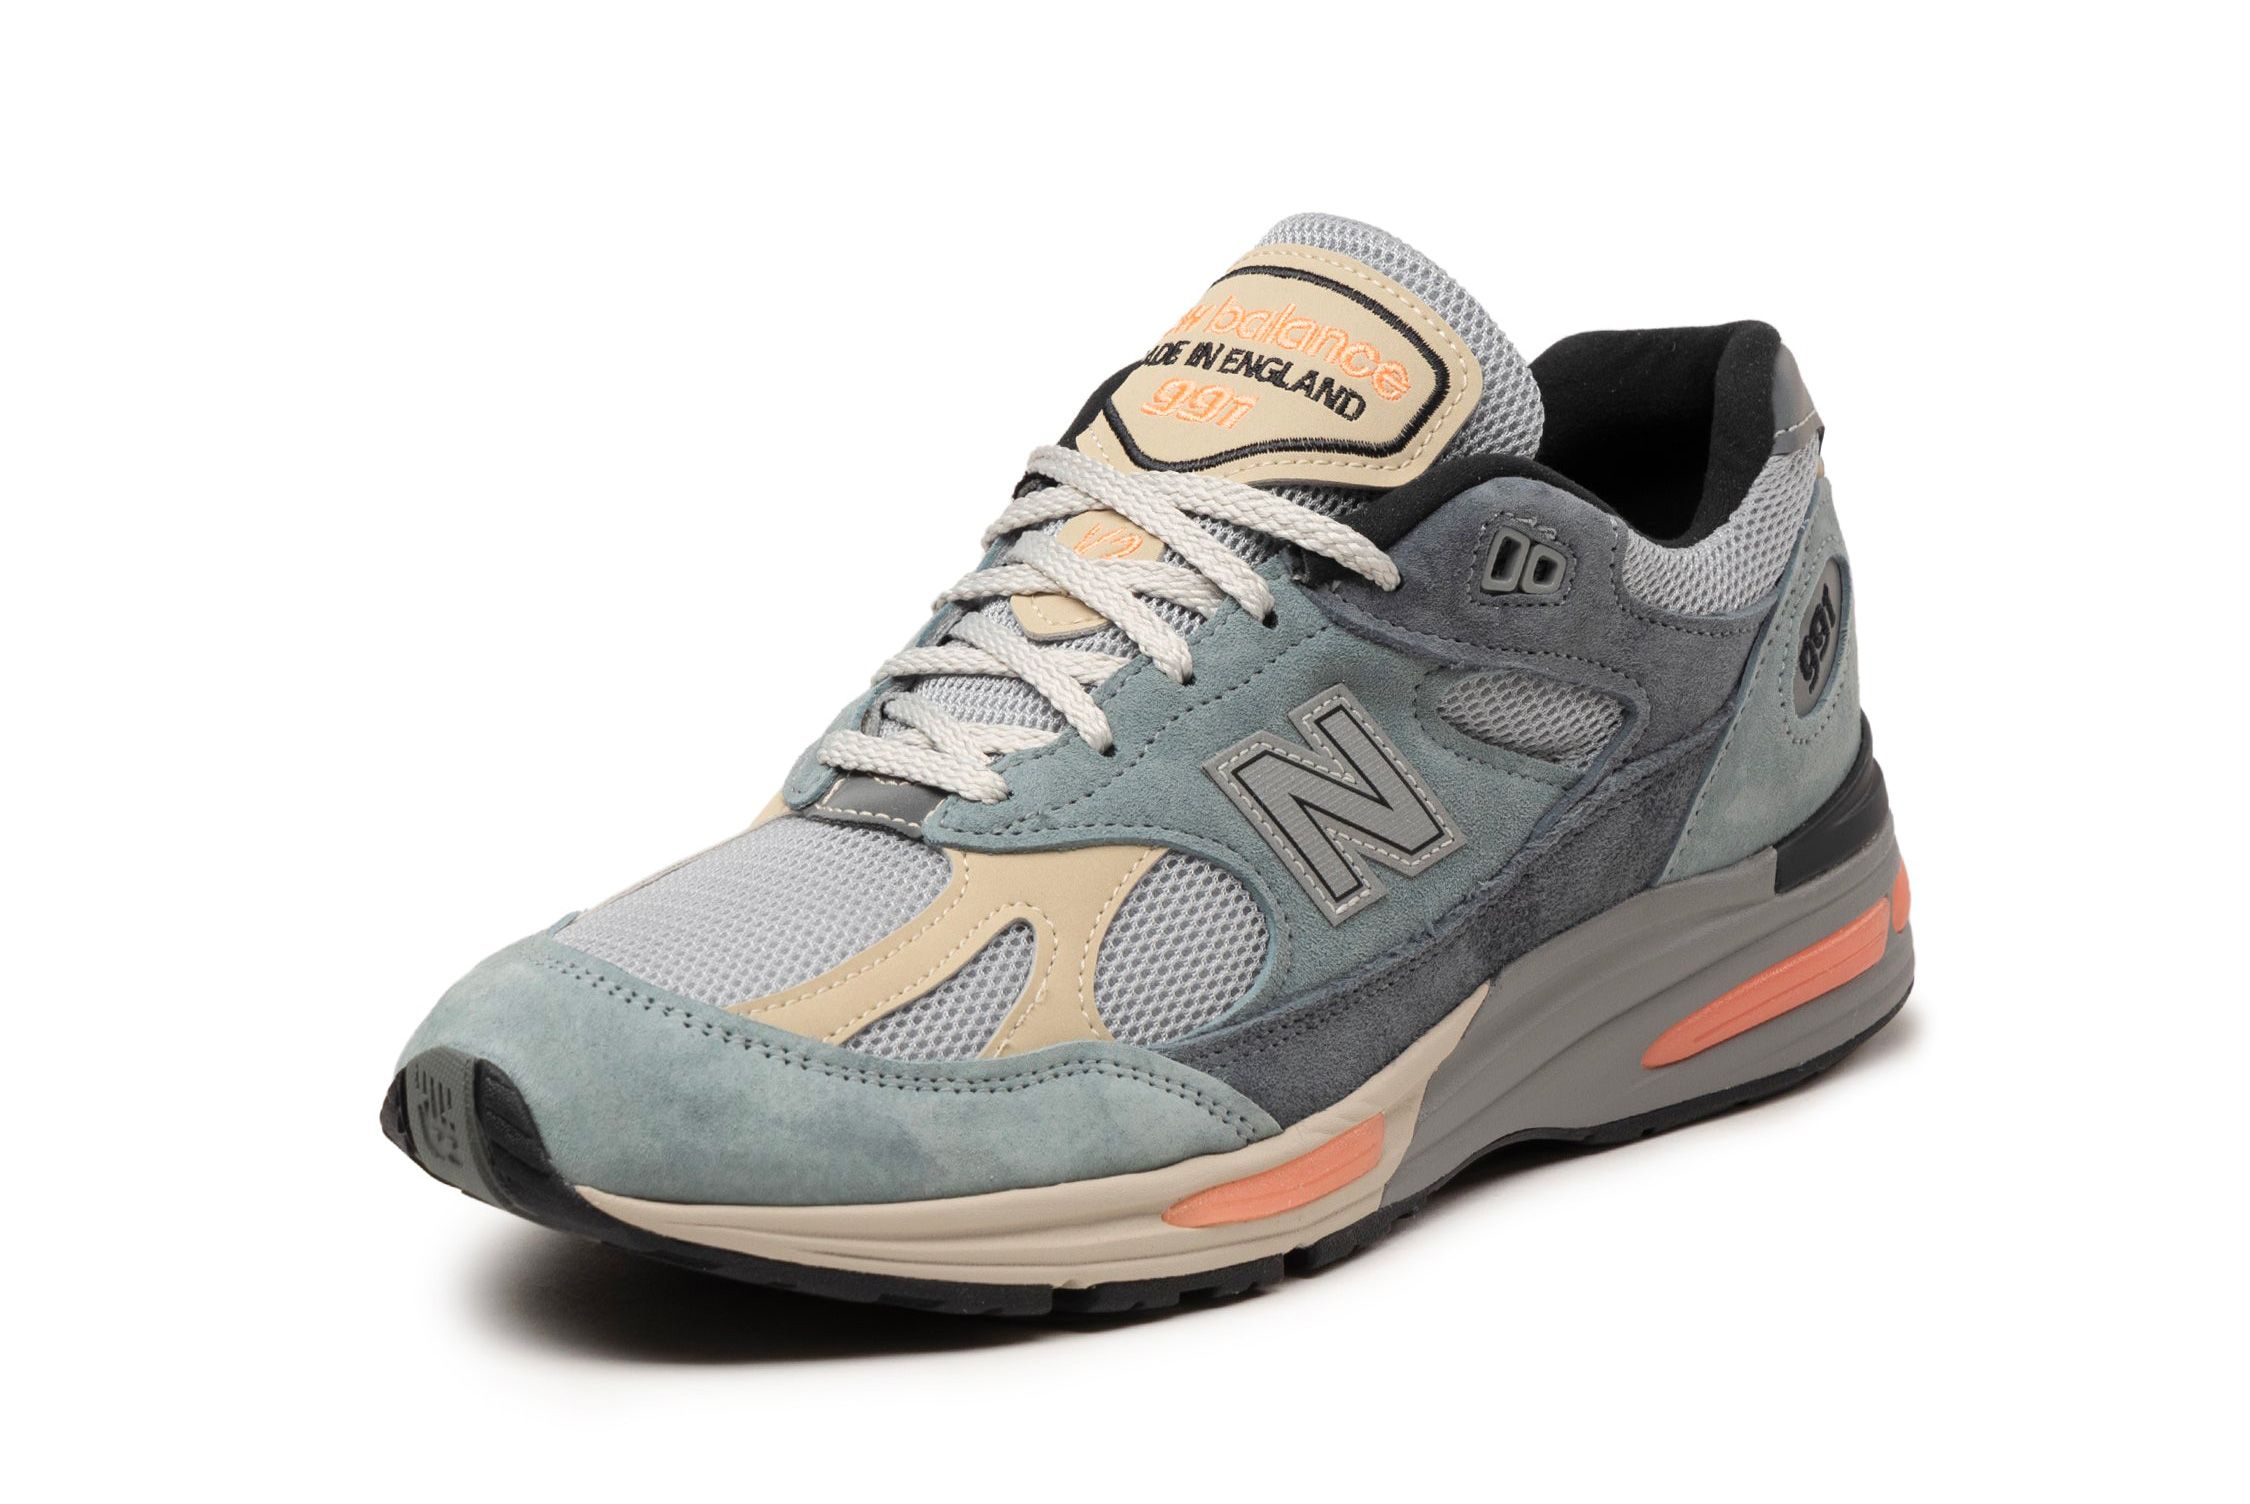 The New Balance 991v2 'Blue Silver' and 'Rosewood' Just Launched